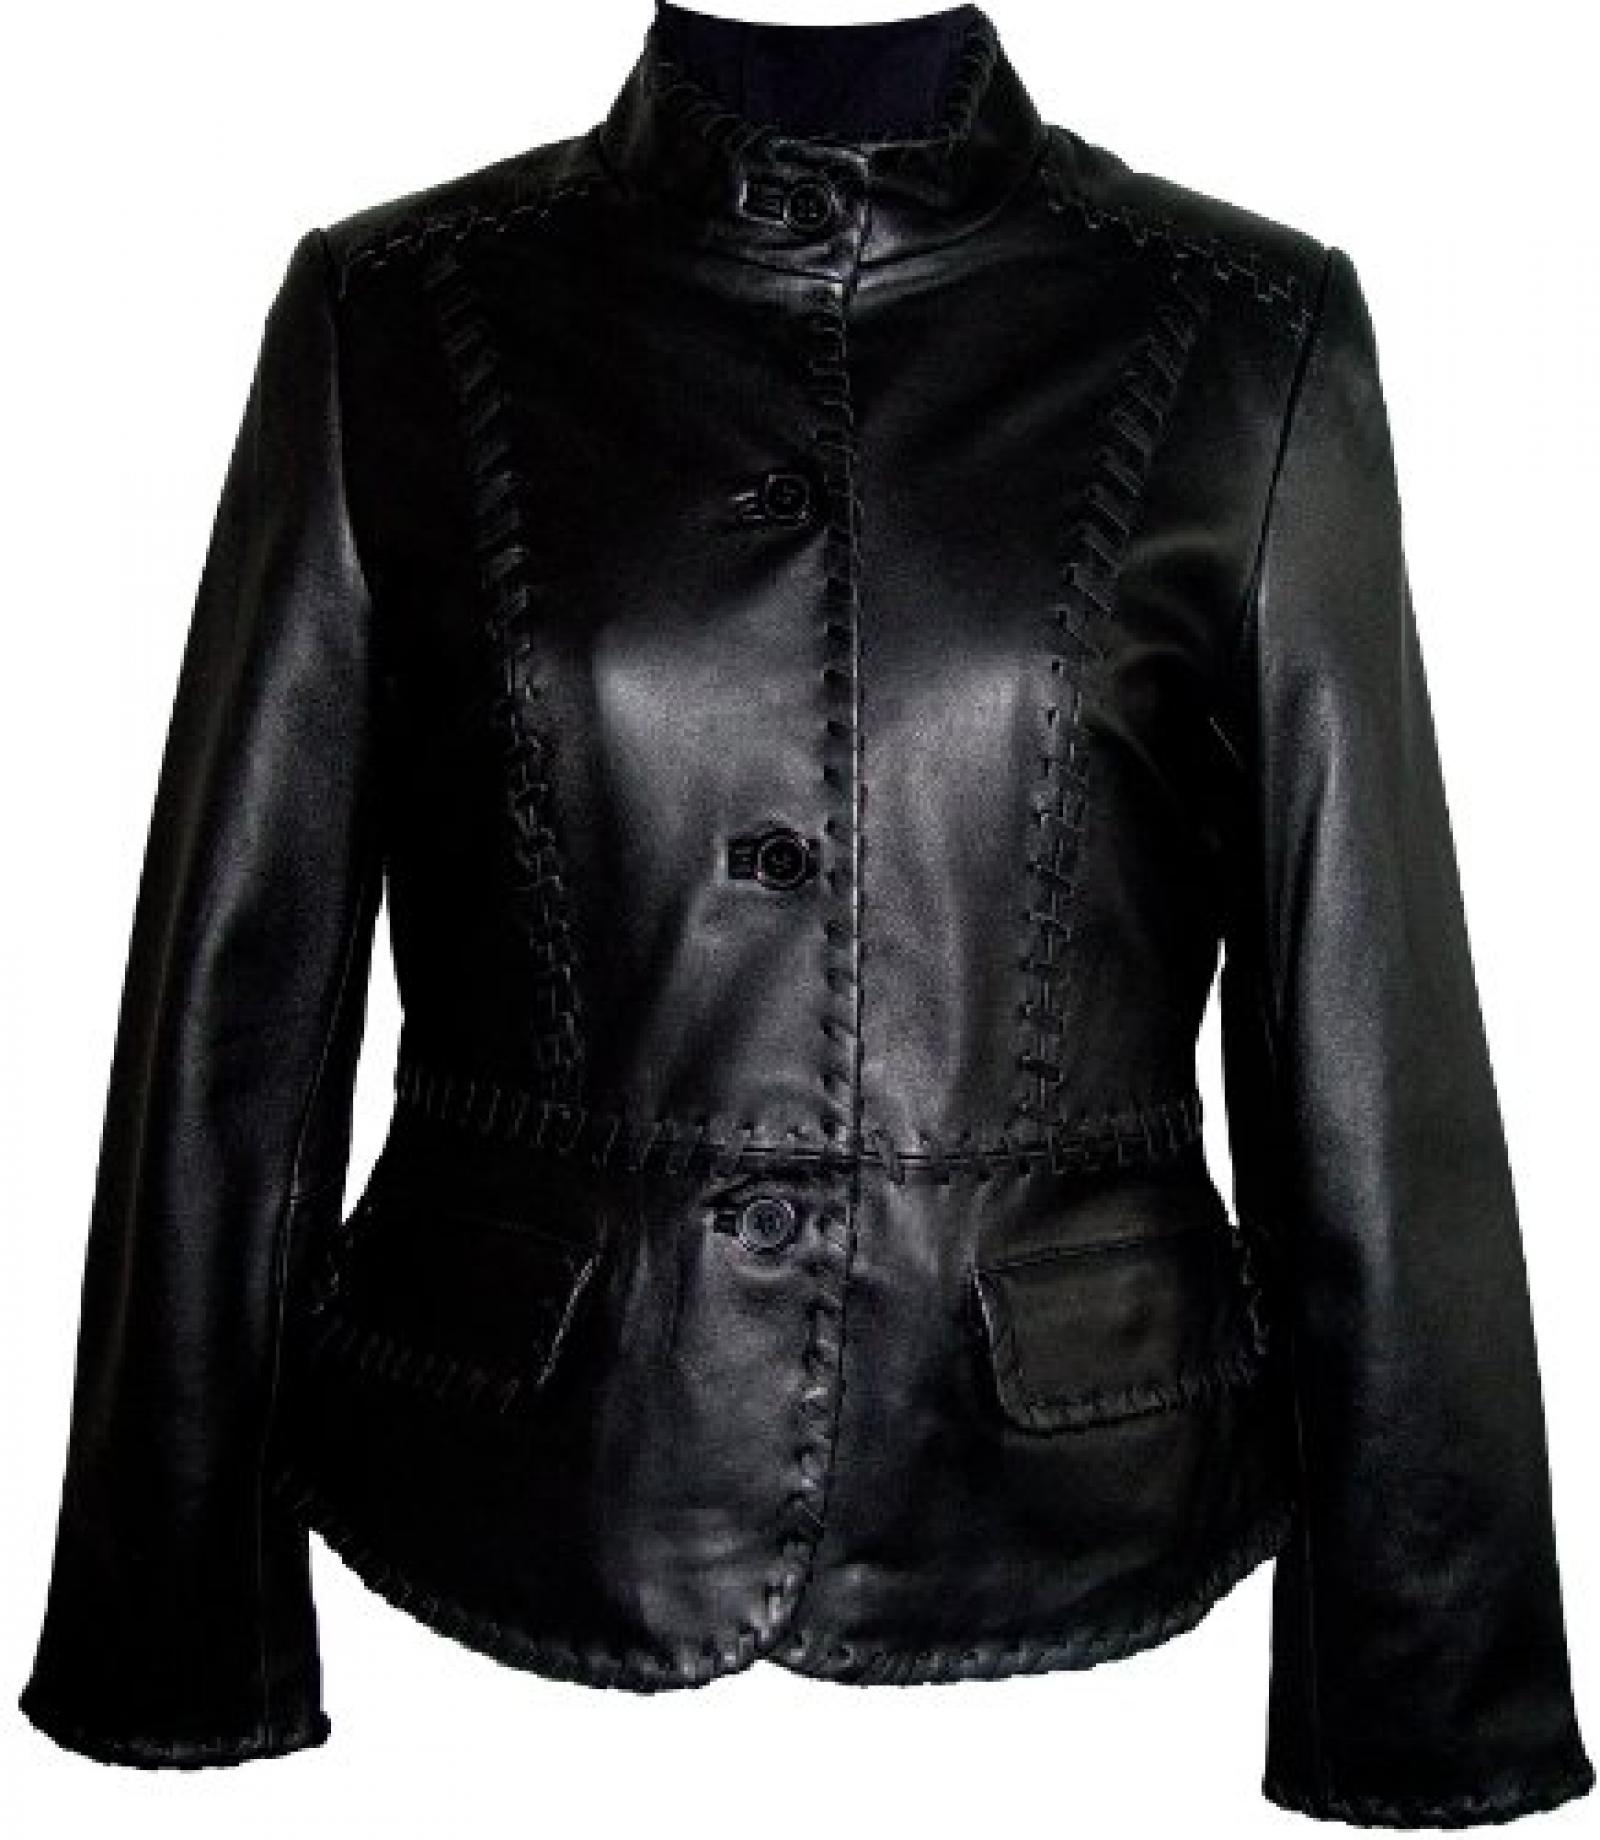 Paccilo FREE tailoring Womens 4025 Real Lambskin Short Leather Jacket 